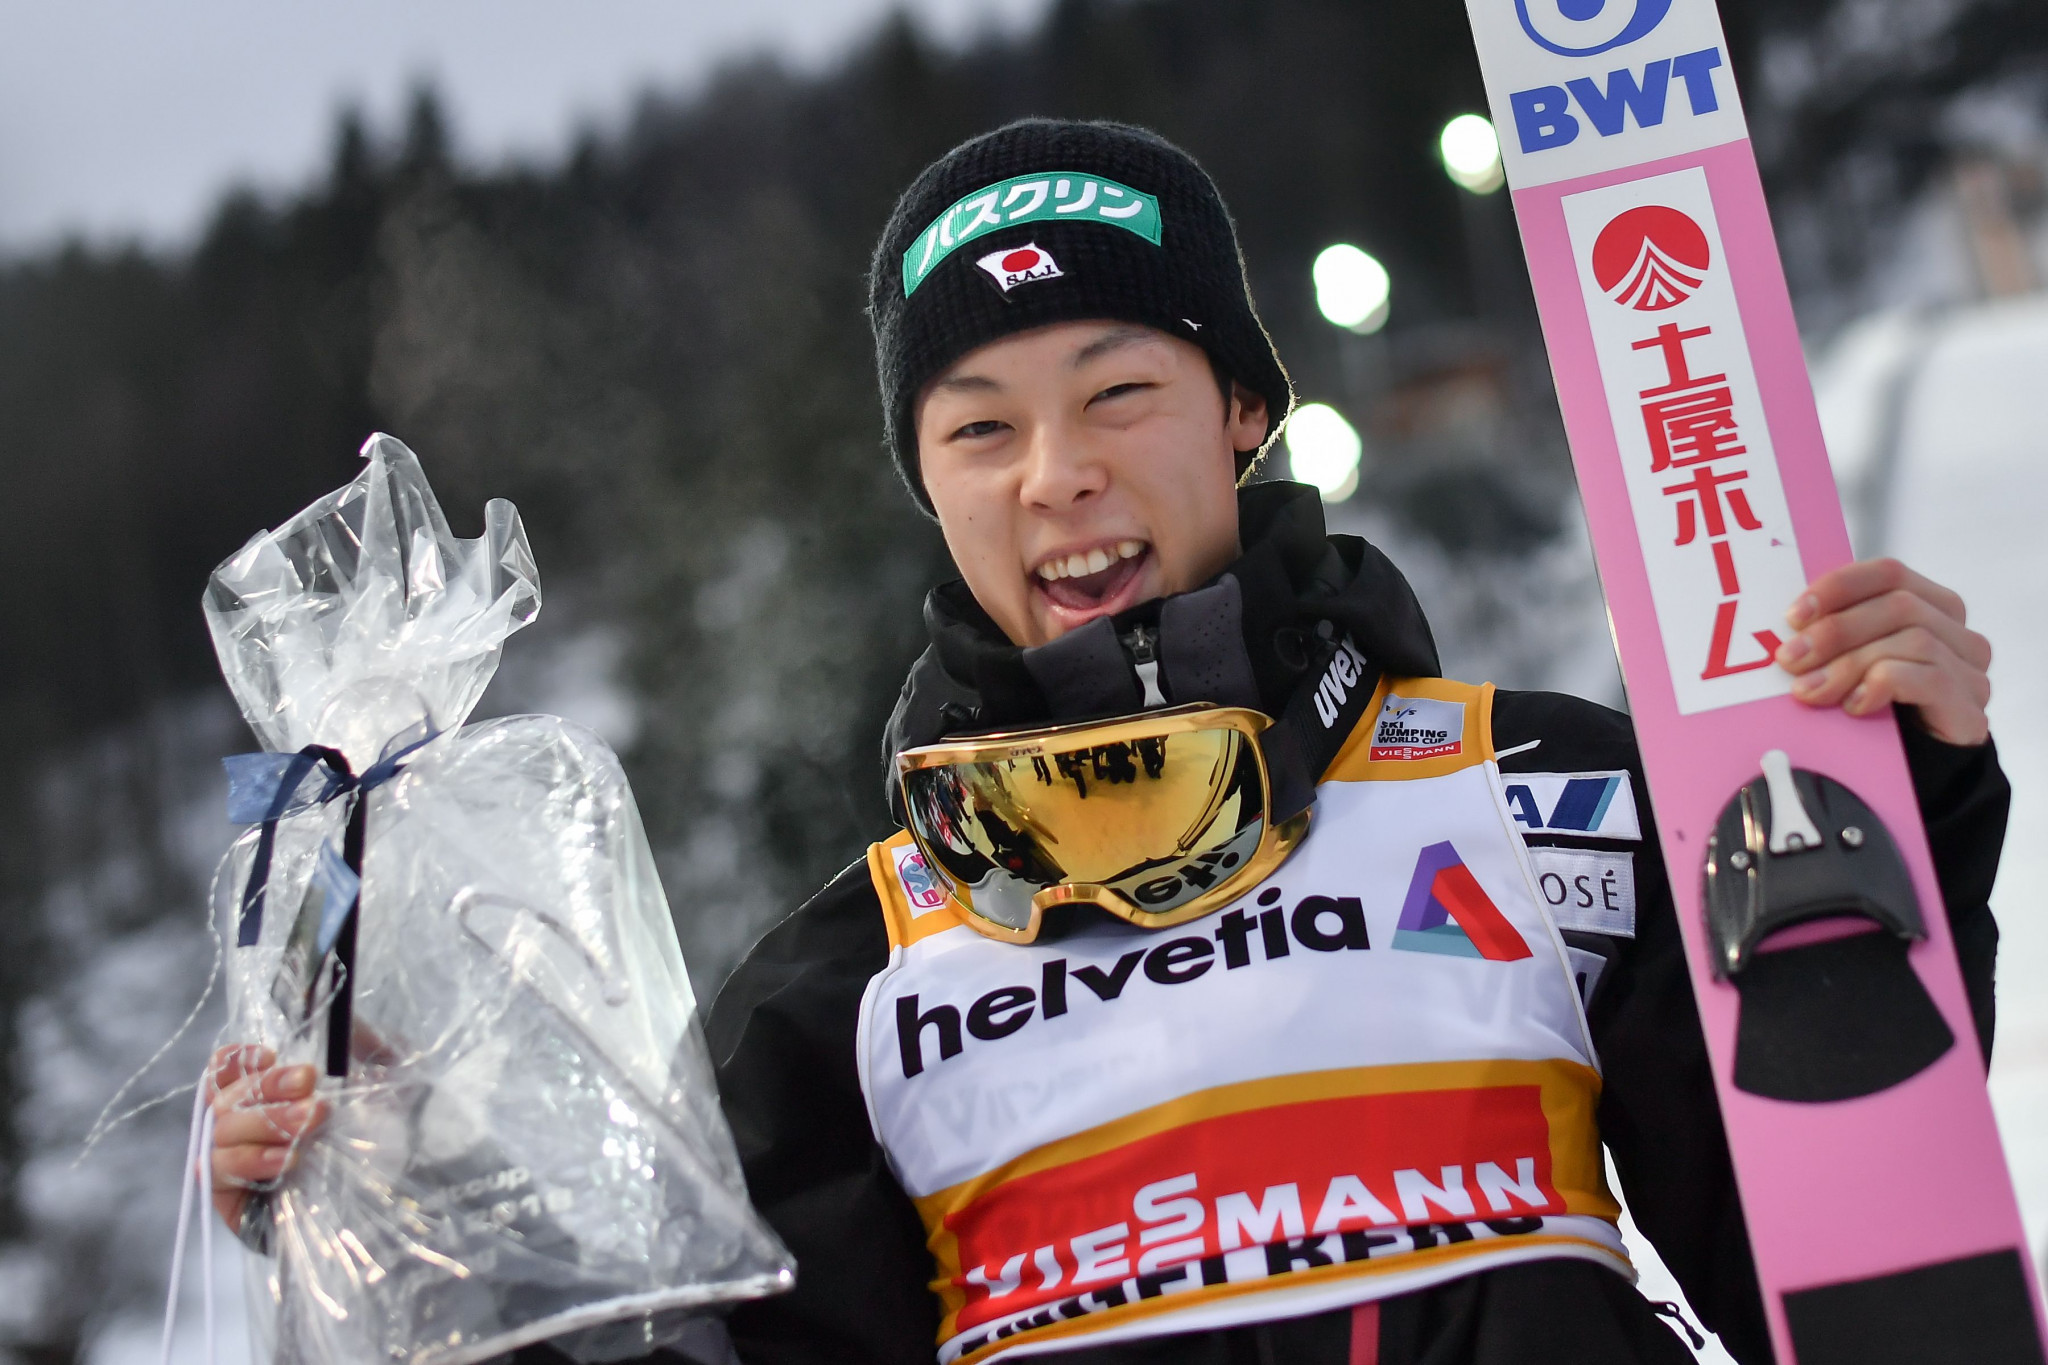 Ryoyu Kobayashi won the Ski-Jumping World Cup competition held today in Engelberg ©Getty Images